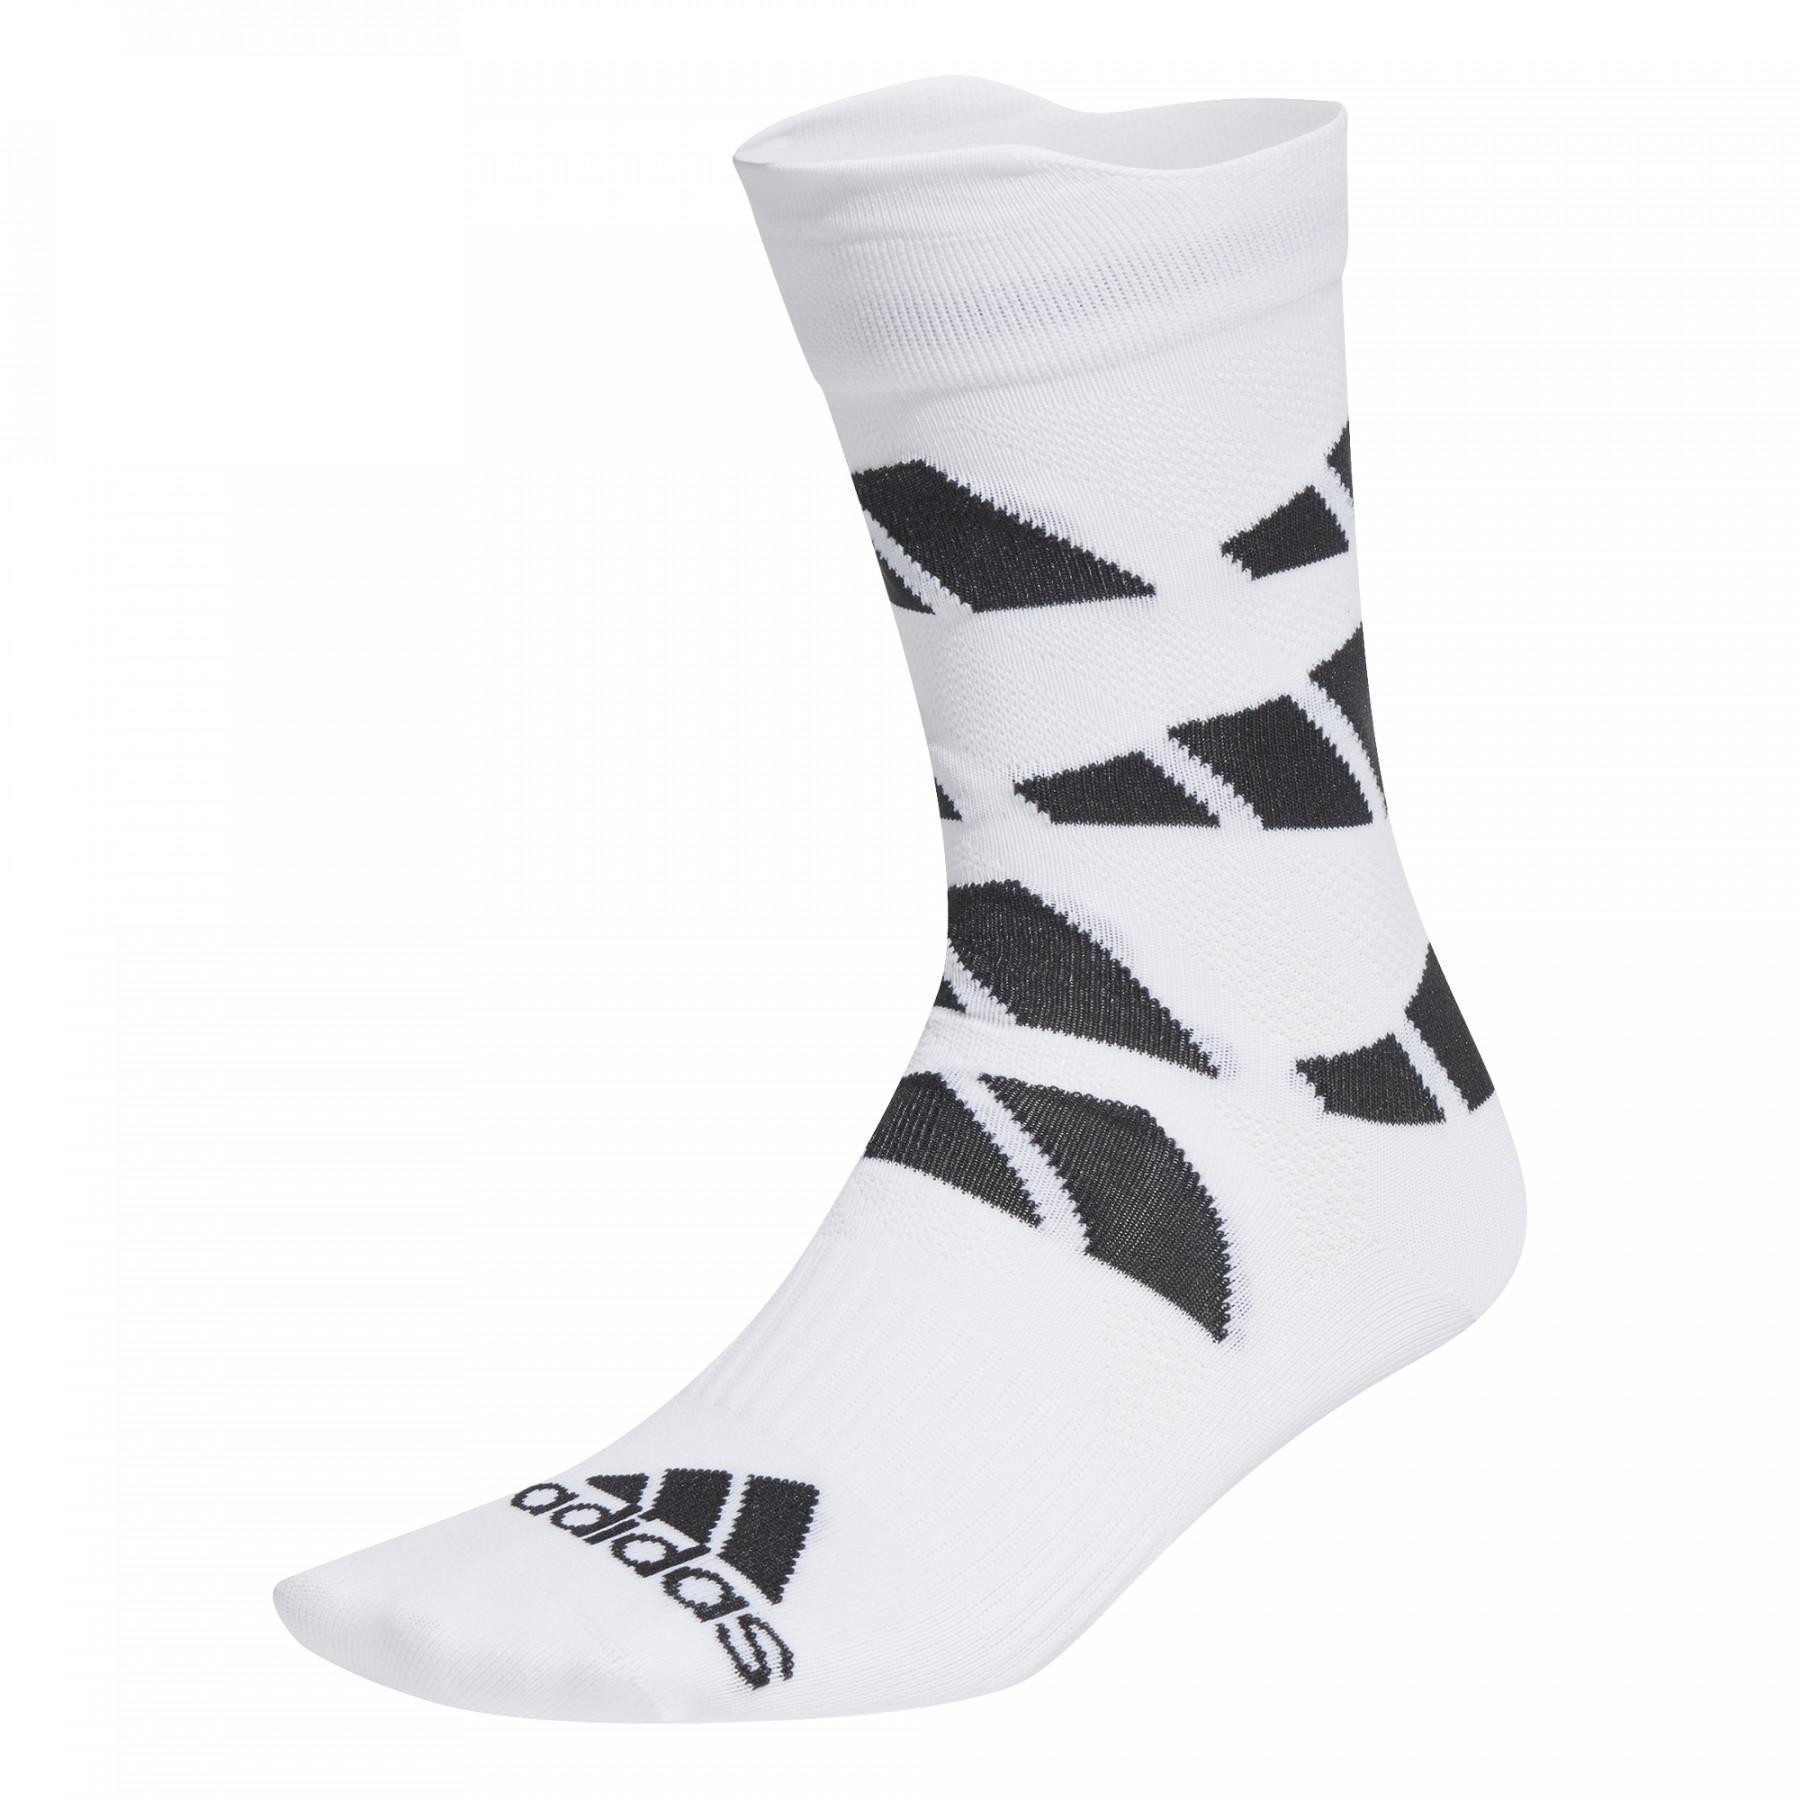 Chaussettes adidas Ultralight Allover GraphicPerformance